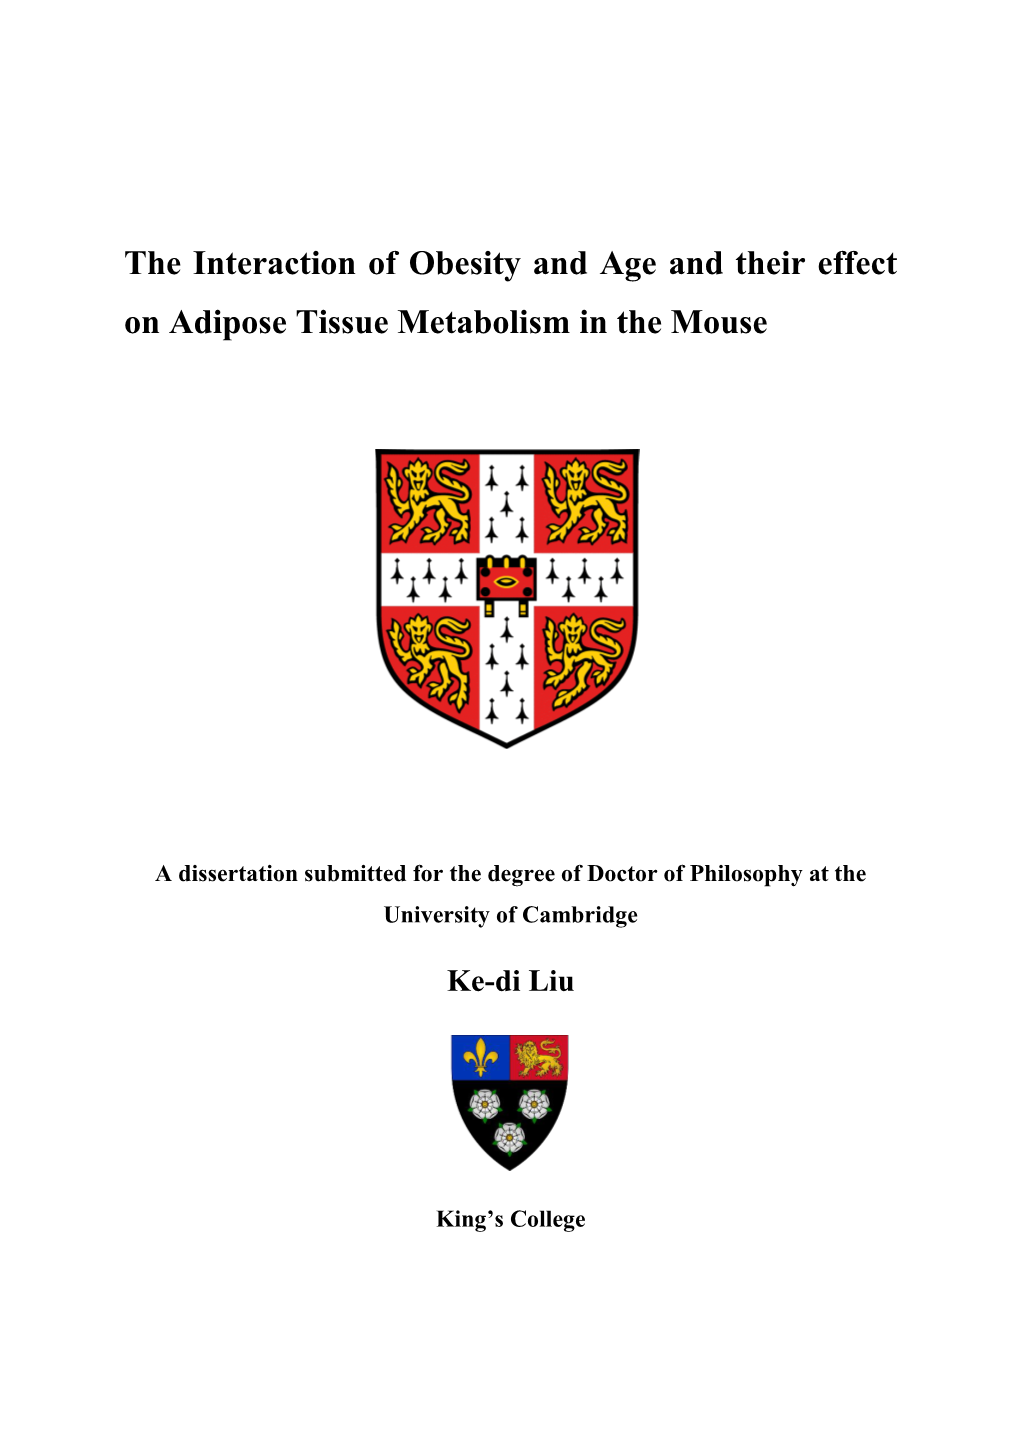 The Interaction of Obesity and Age and Their Effect on Adipose Tissue Metabolism in the Mouse